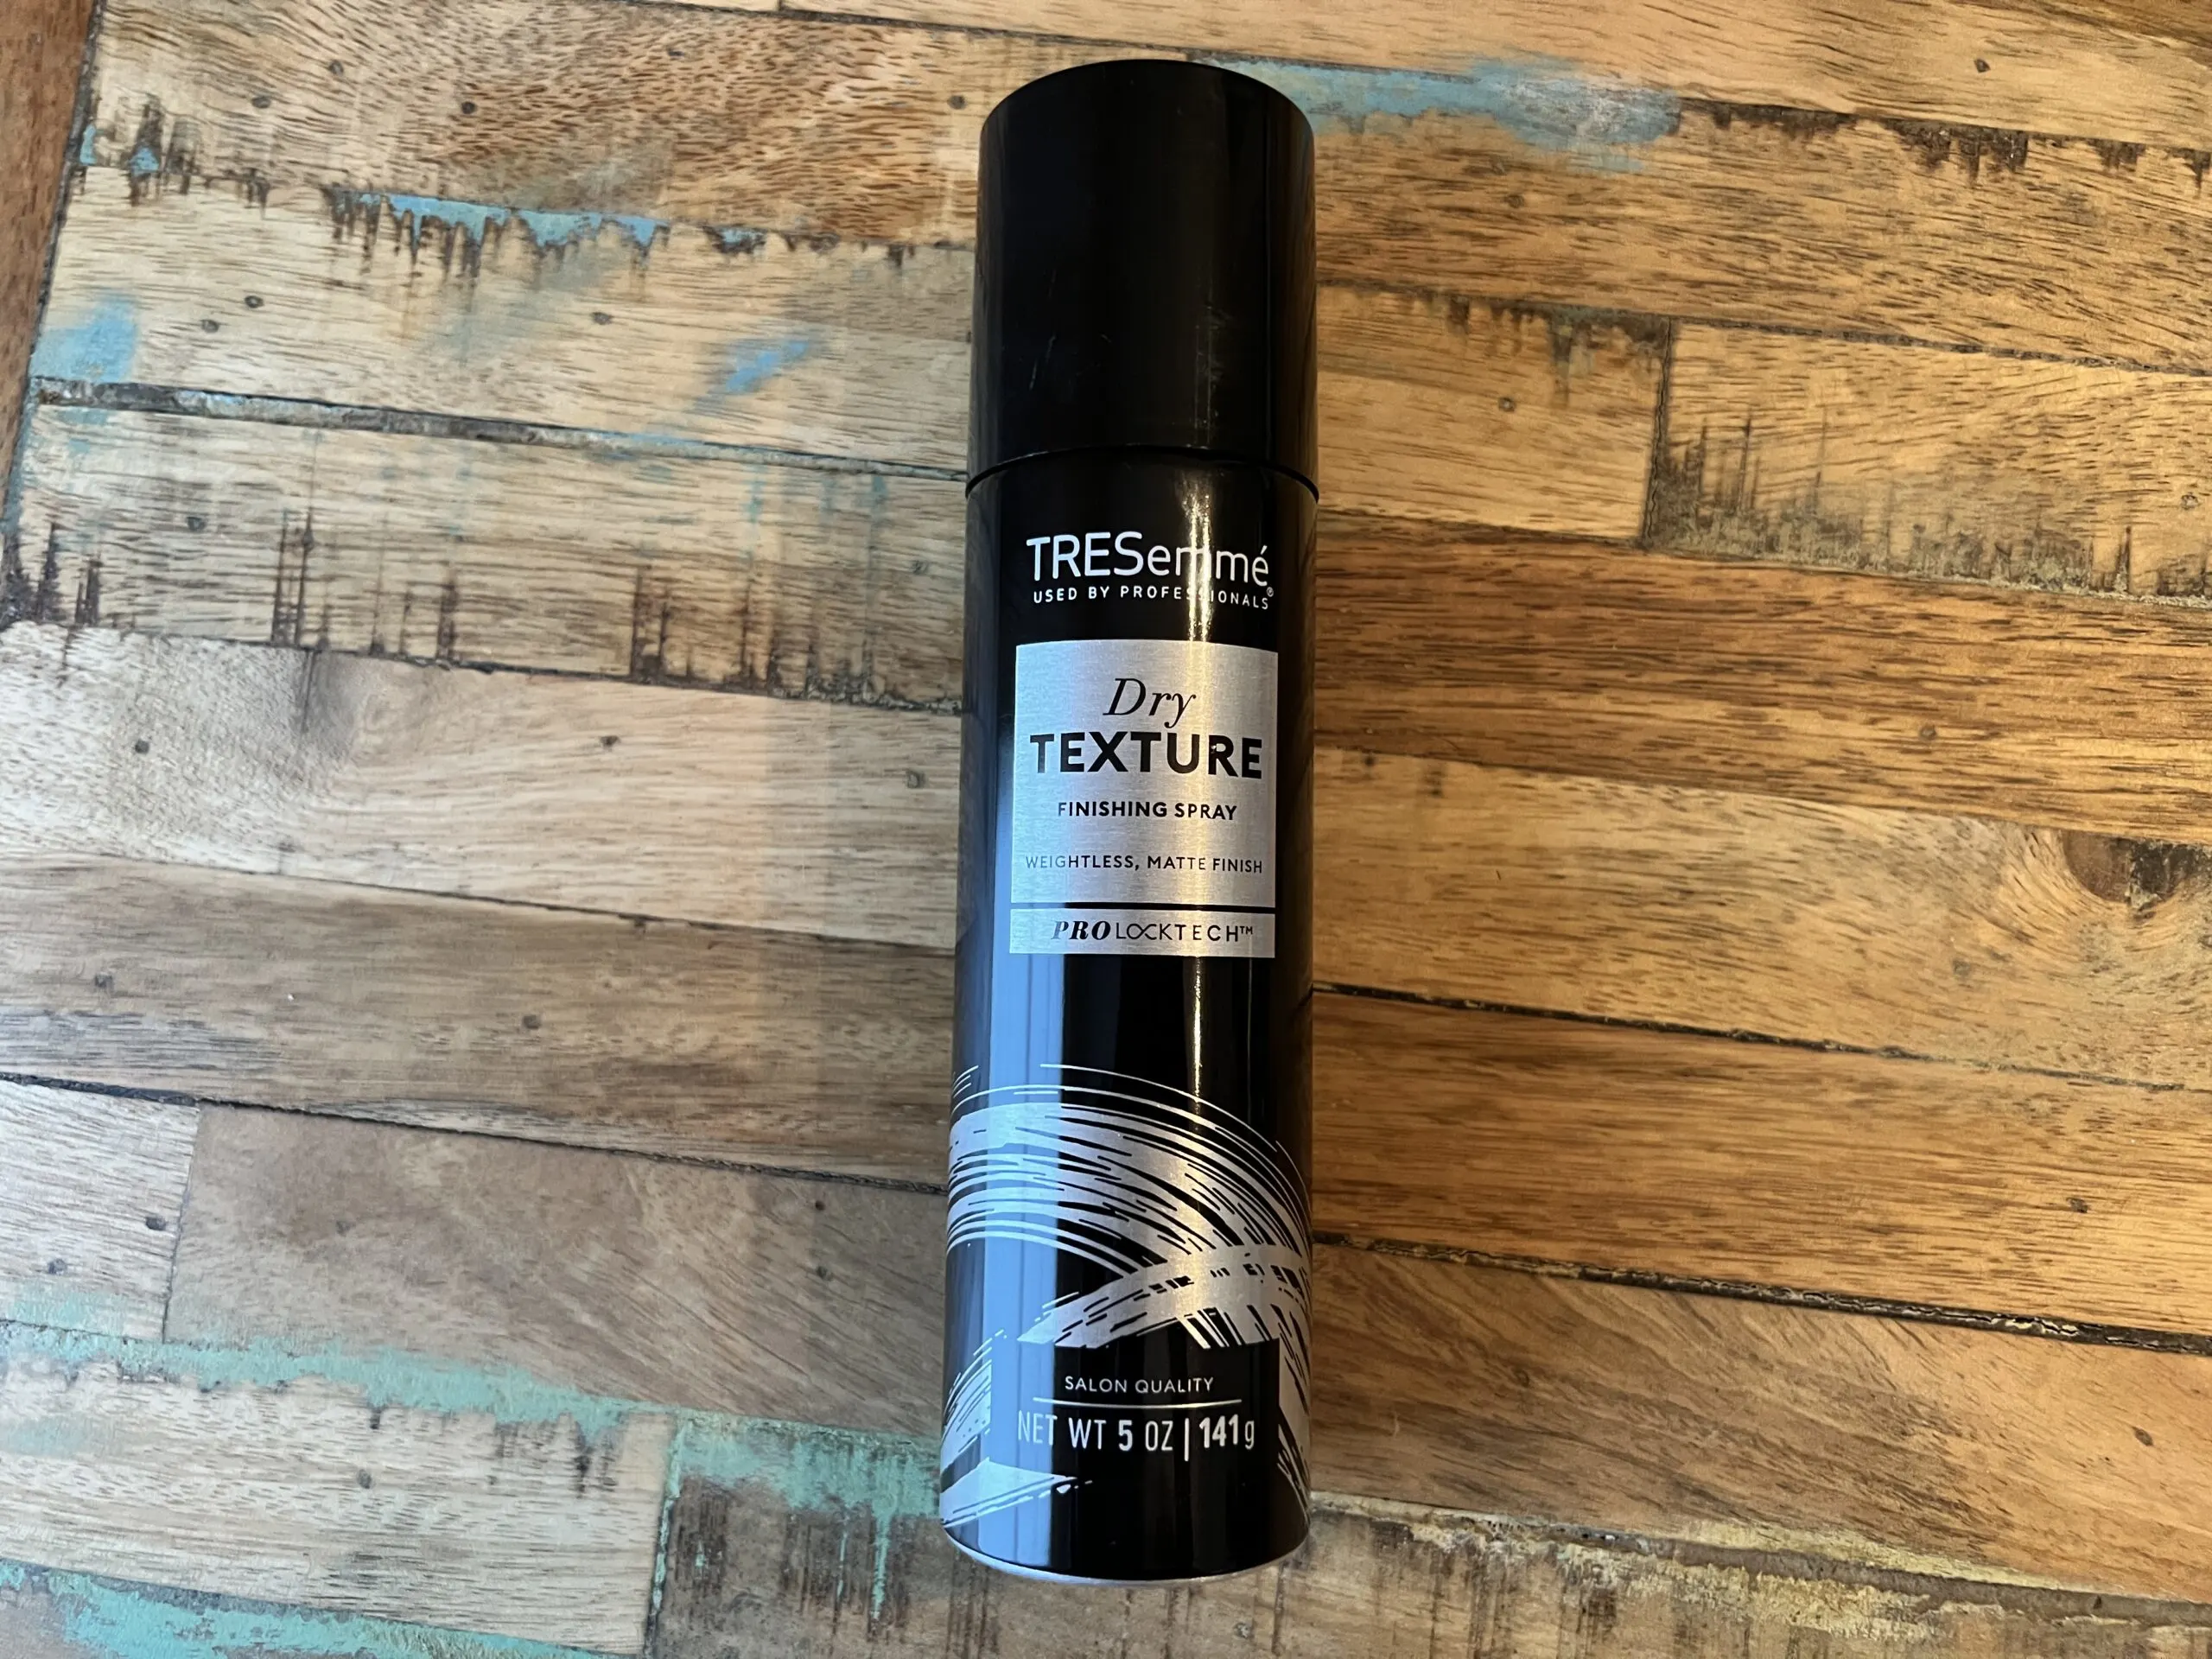 TRESemmé Used by Professionals - Dry Texture Finishing Spray with a weightless, matte finish.